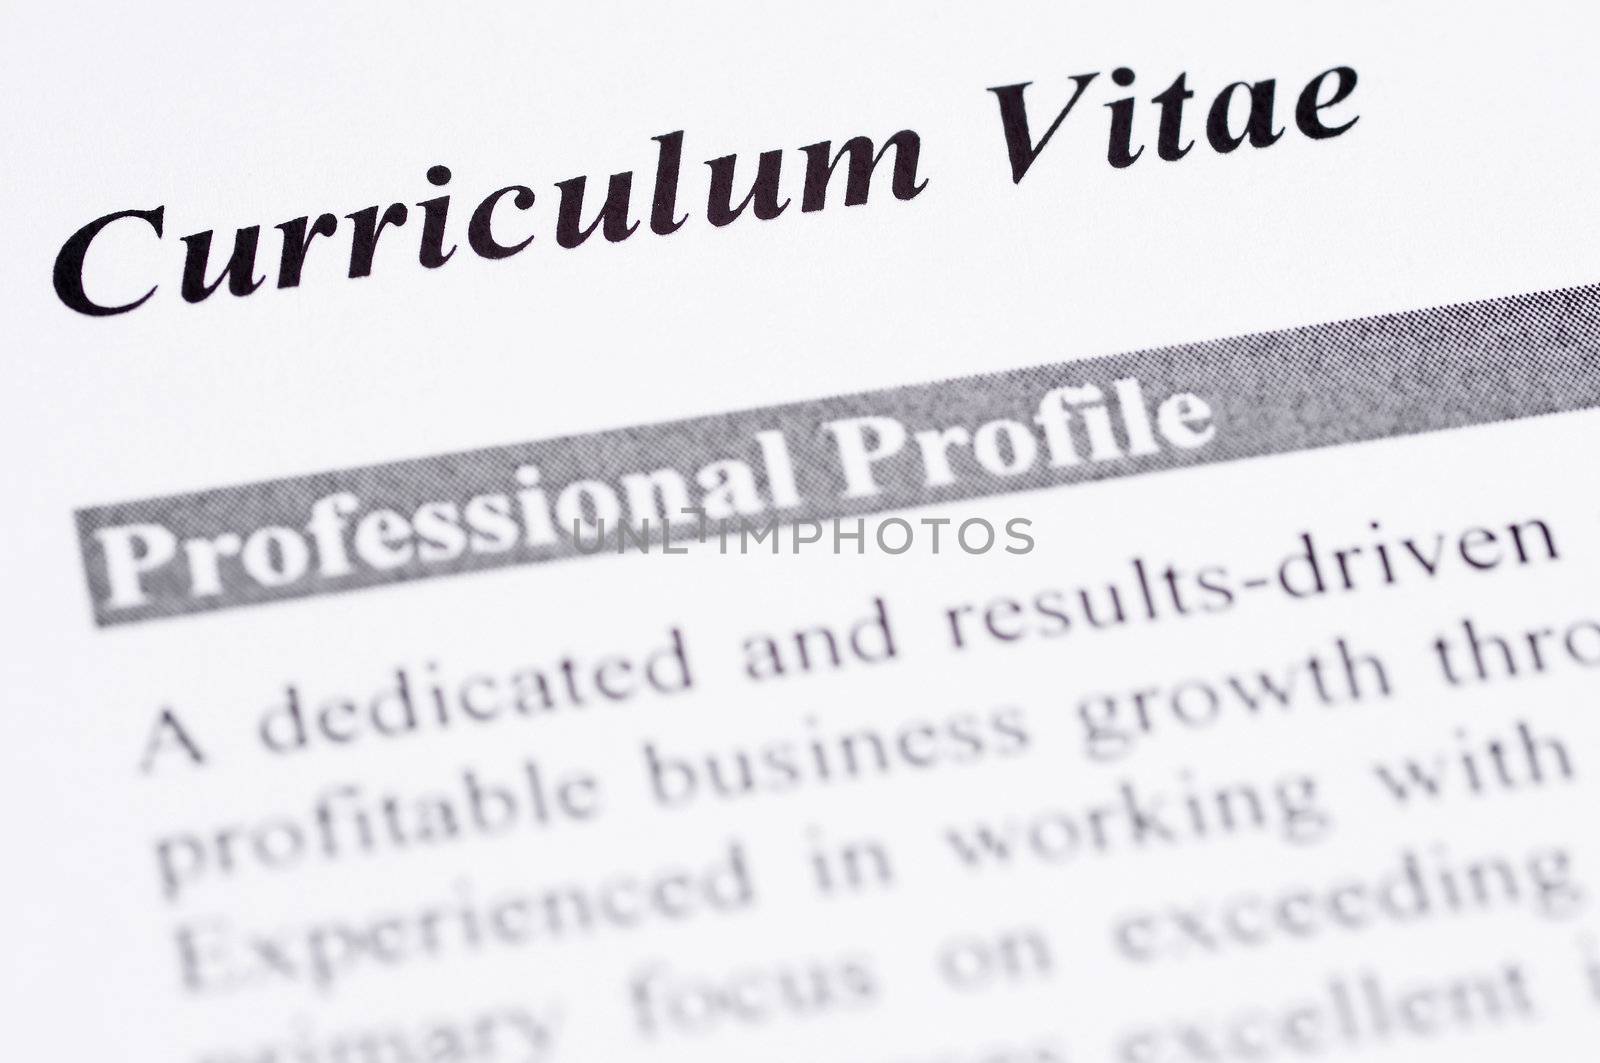 Close up of a Curriculum Vitae with professional profile